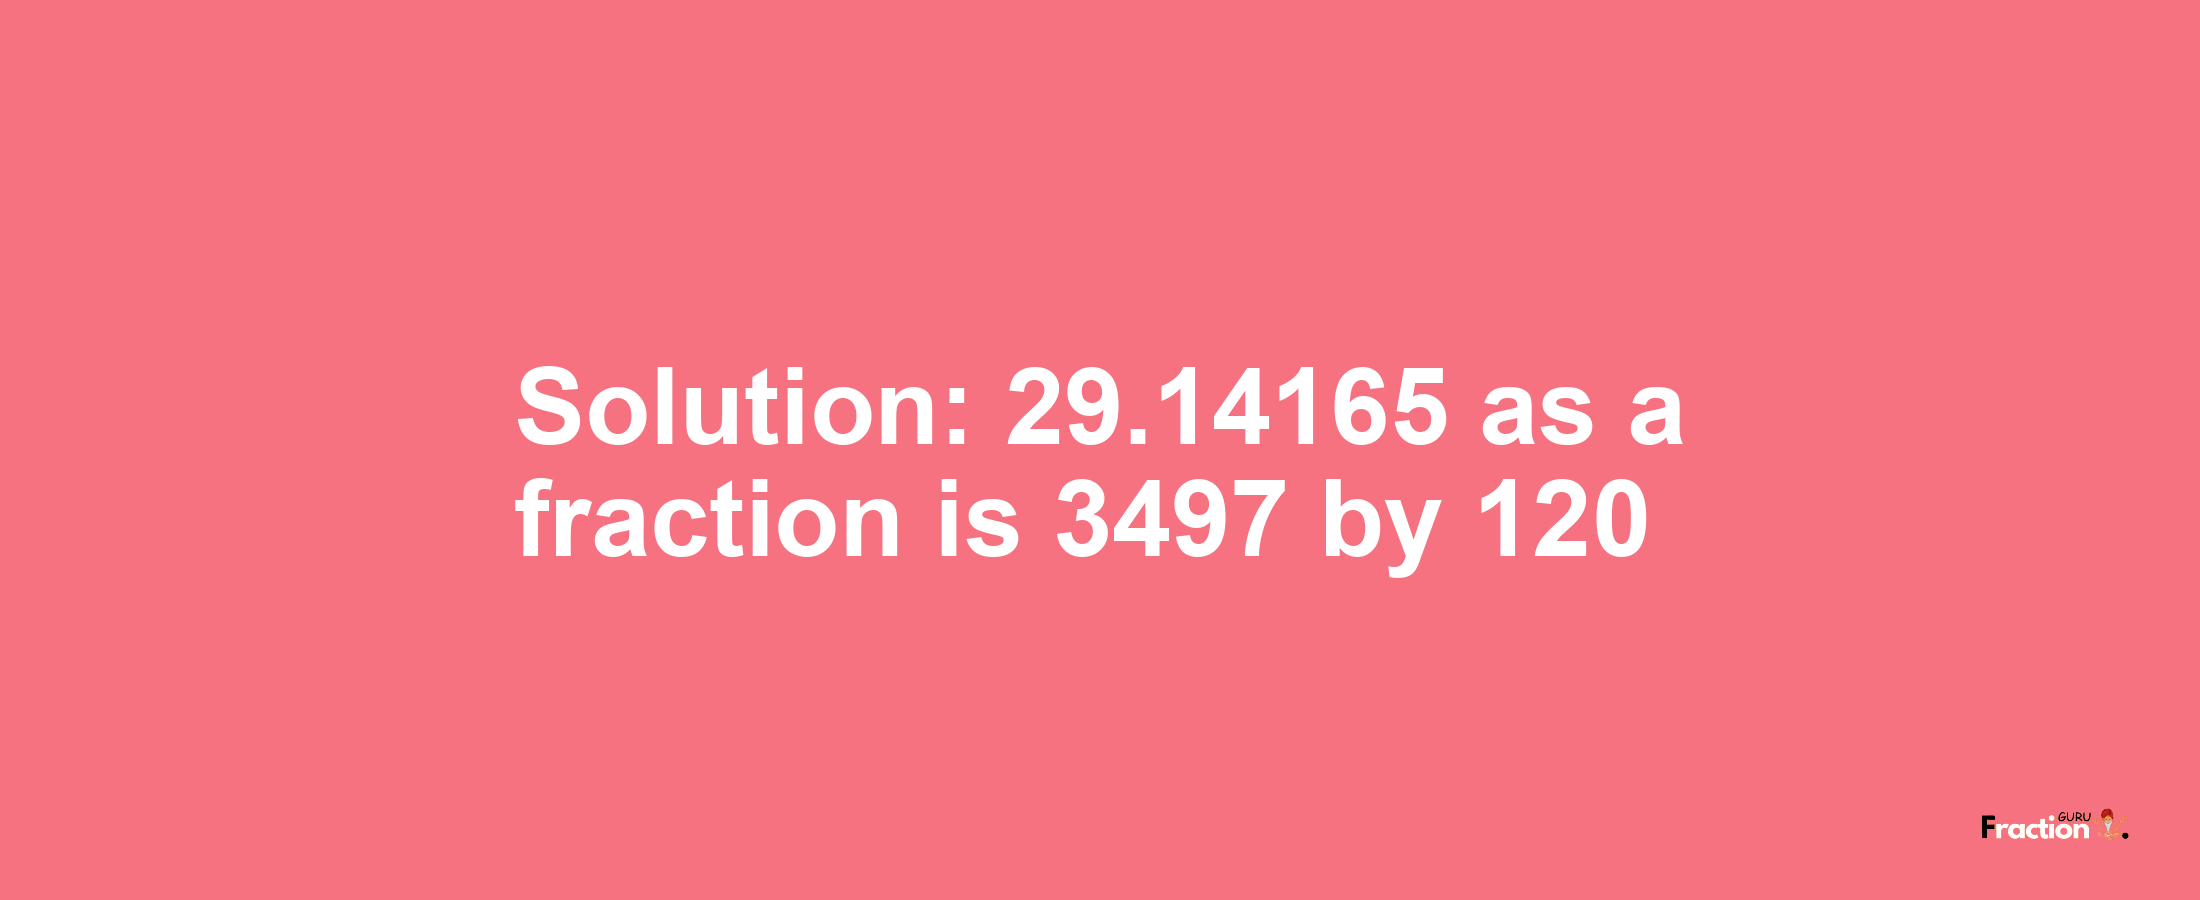 Solution:29.14165 as a fraction is 3497/120